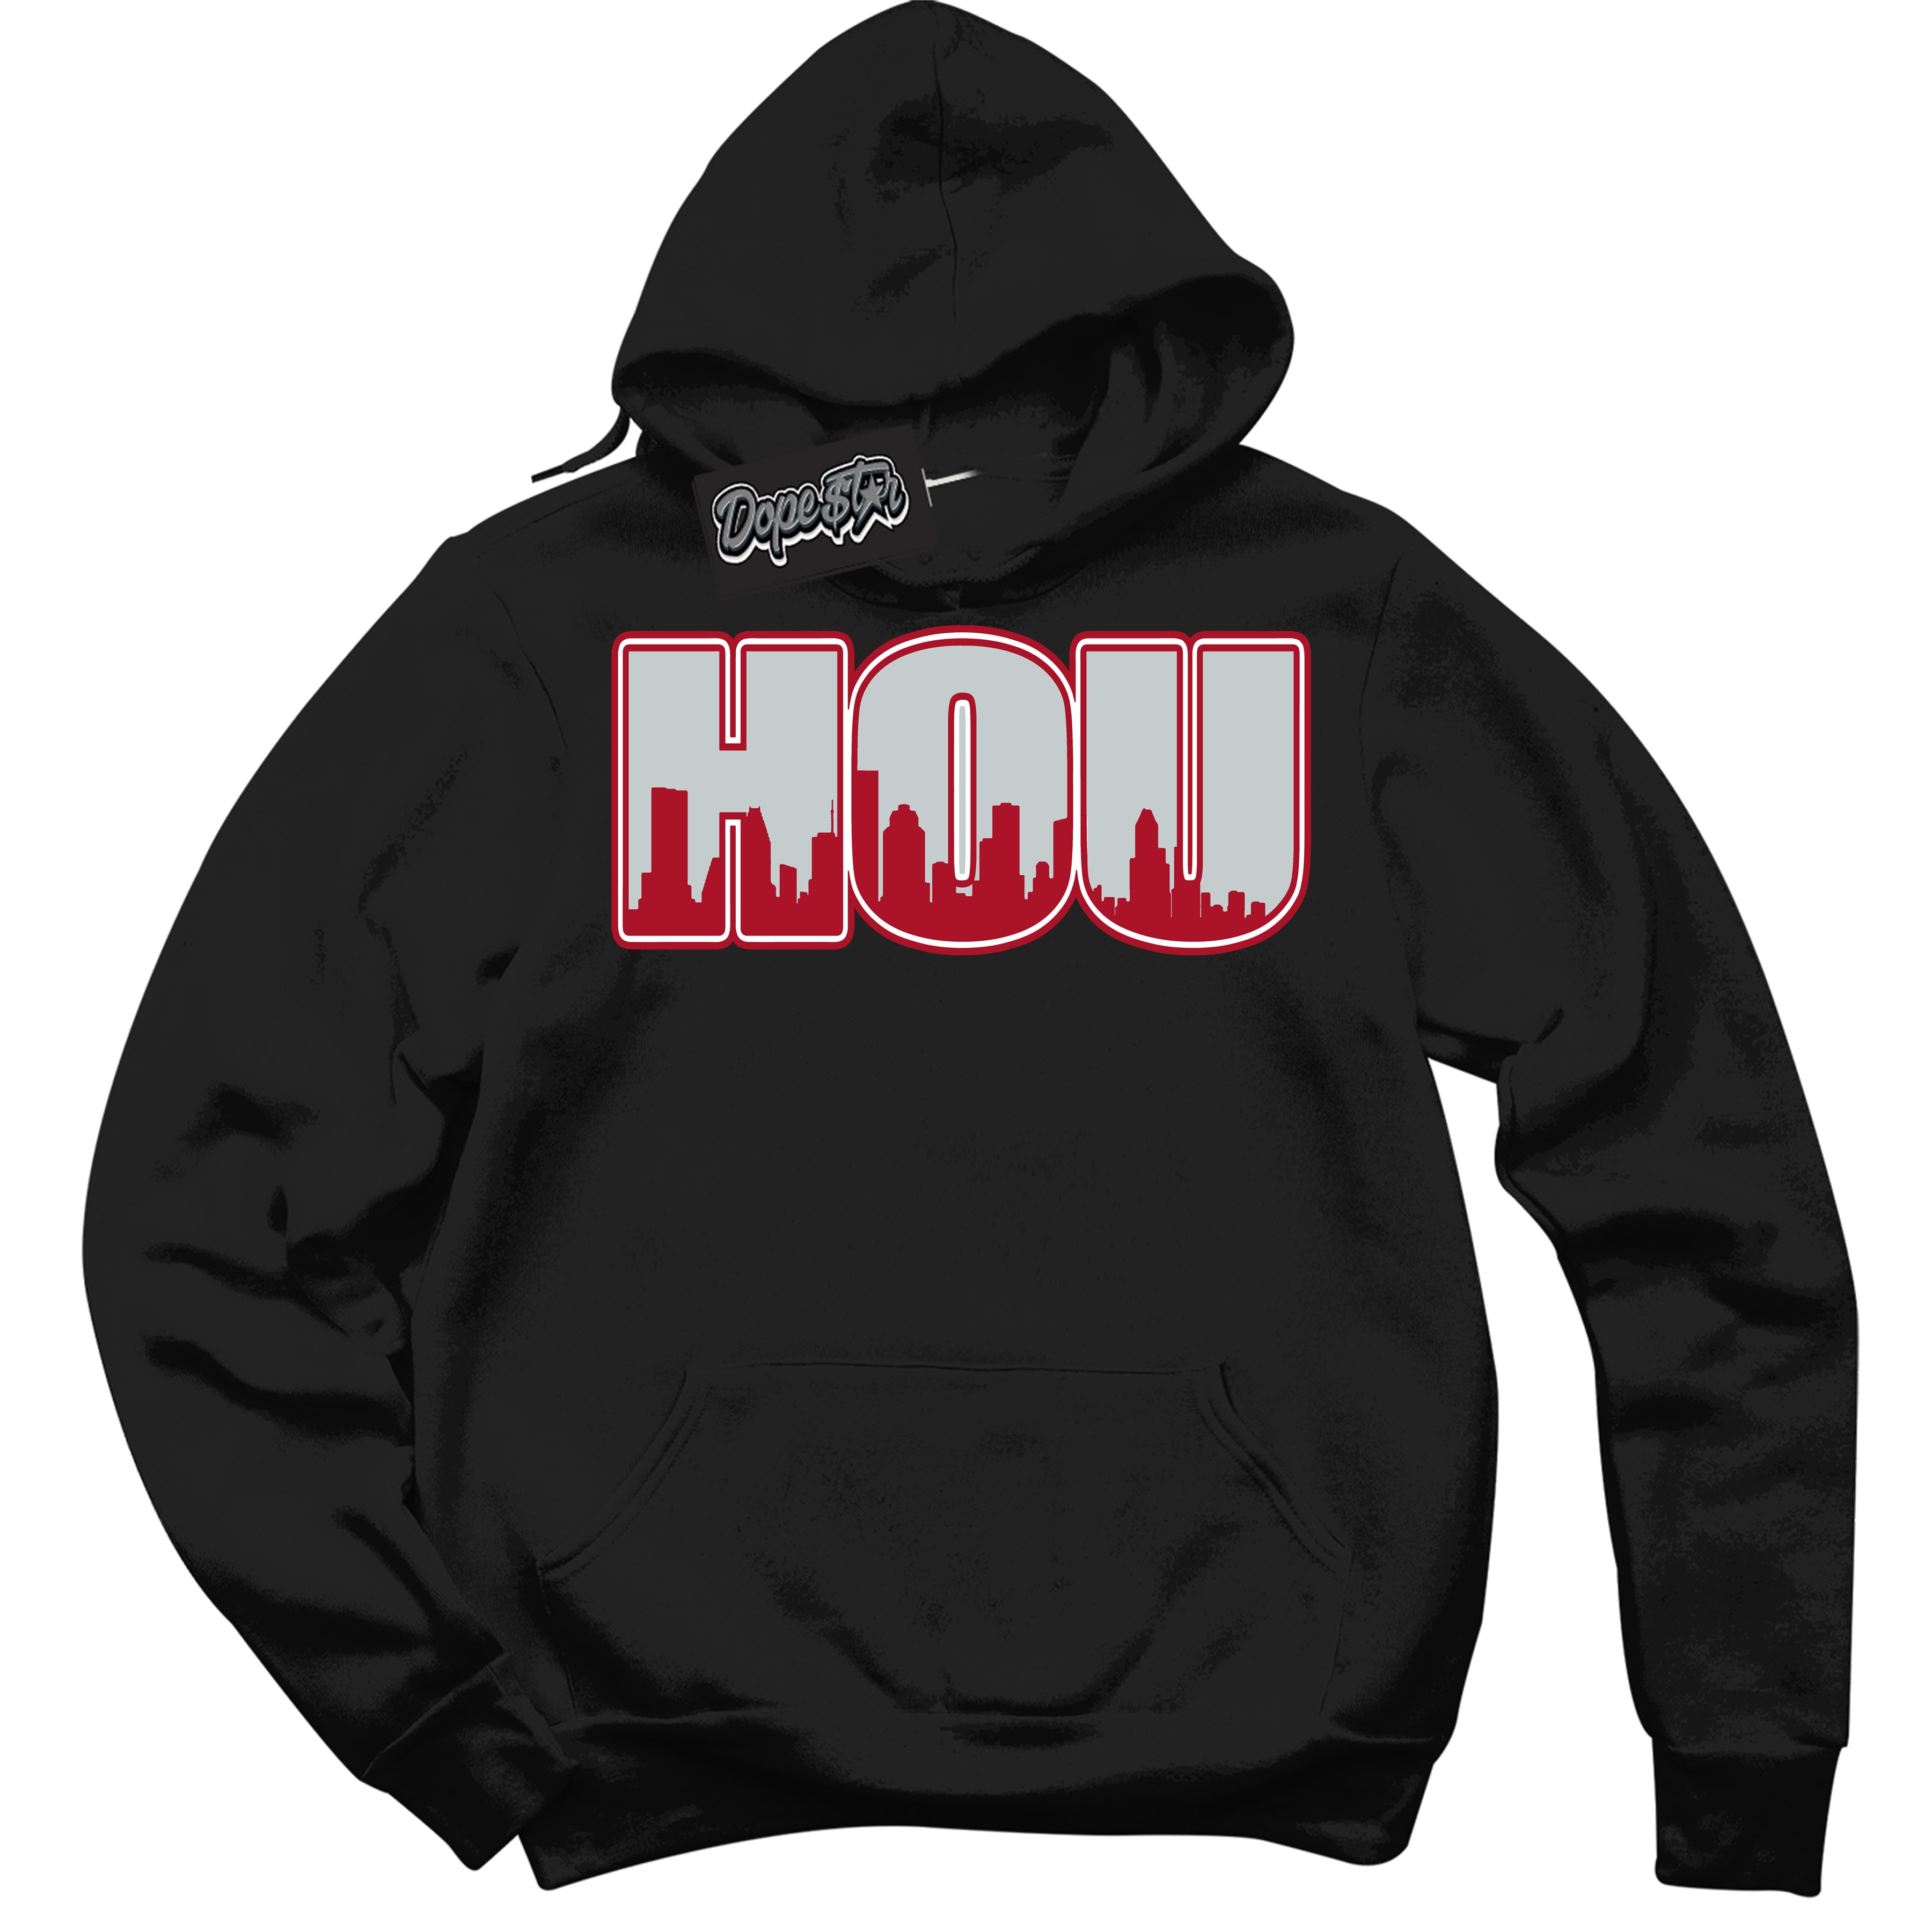 Cool Black Hoodie with “ Houston ”  design that Perfectly Matches  Reverse Ultraman Sneakers.